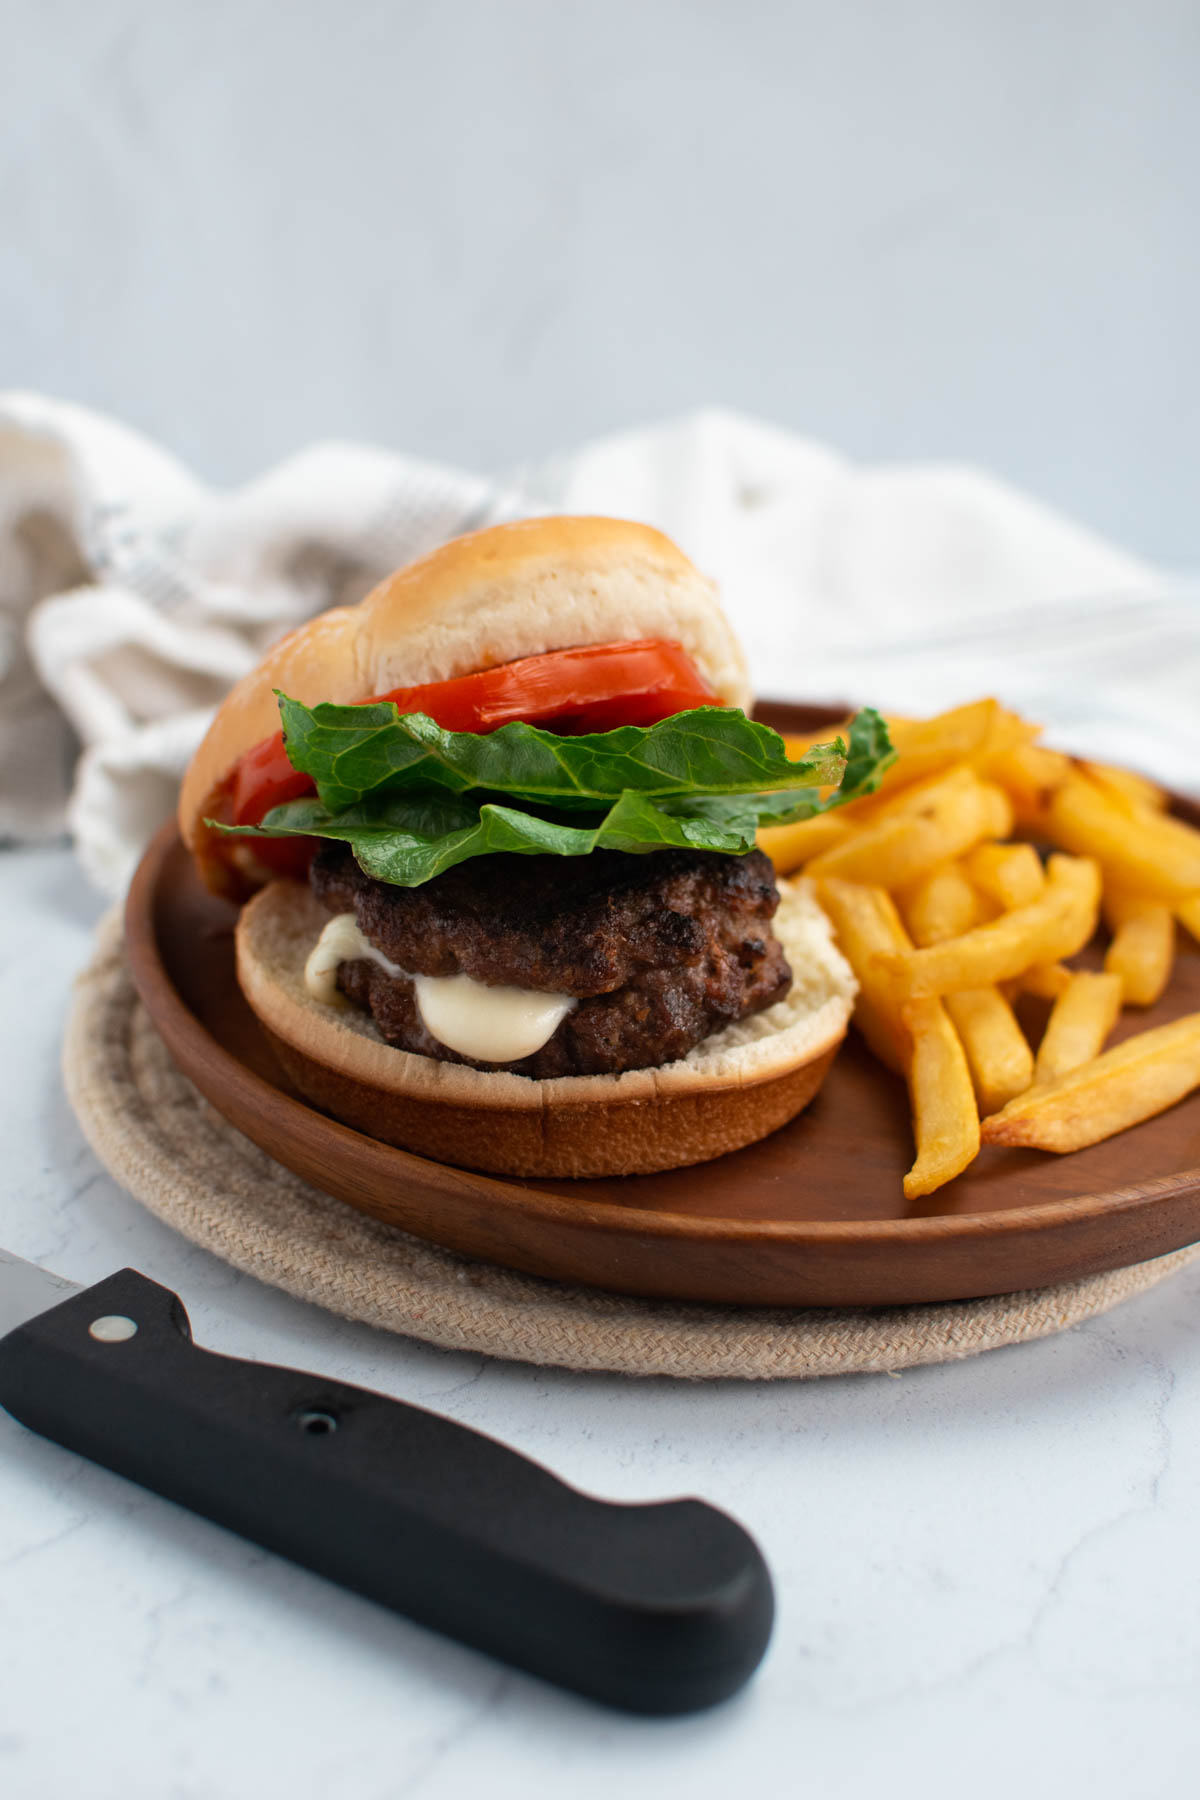 Mozzarella cheese stuffed hamburger on wood plate with french fries.